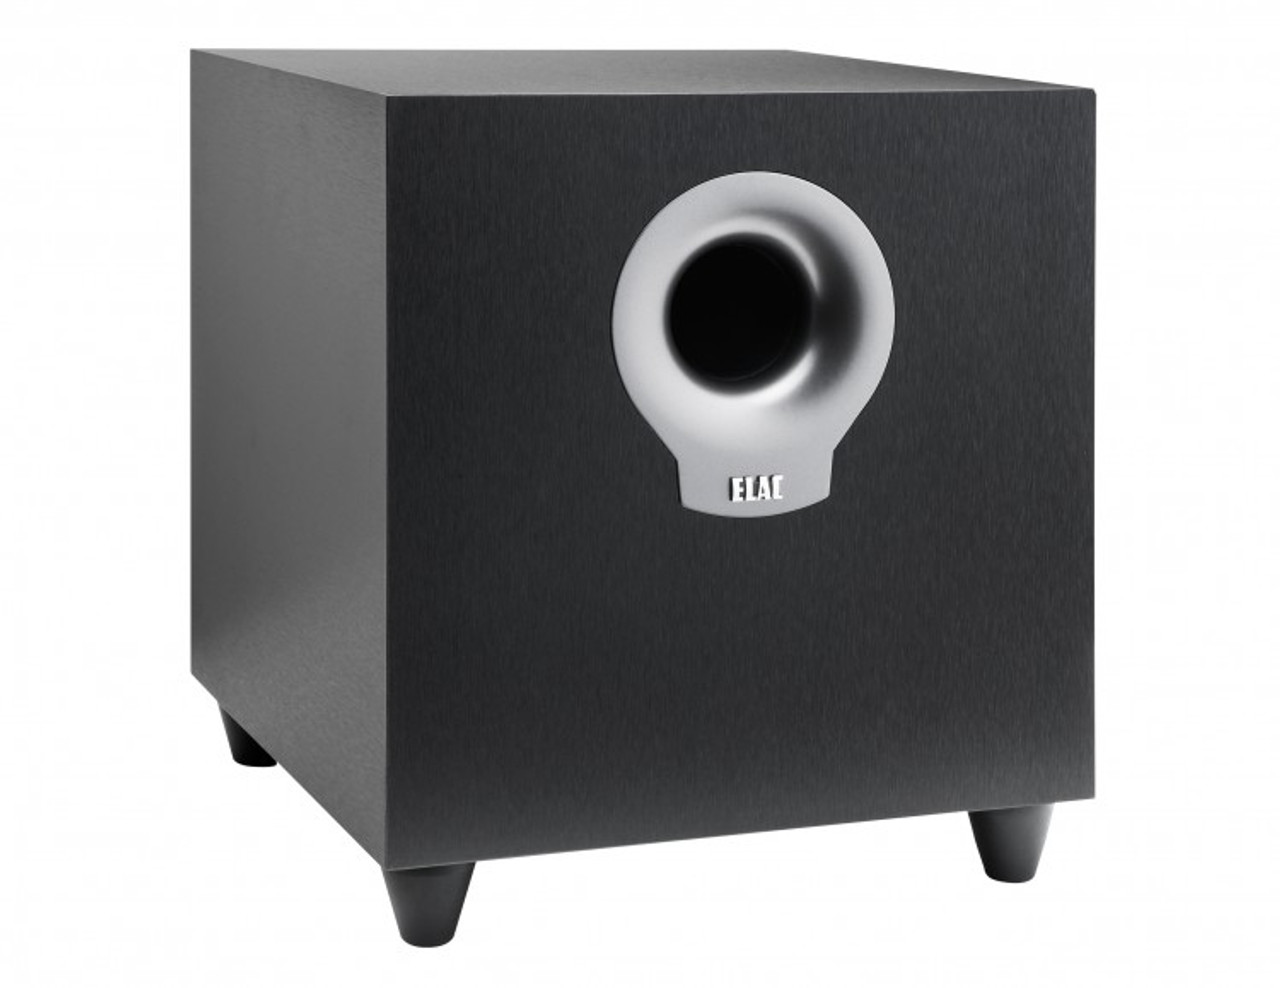 Elac SQ10 Subwoofer Stereophonic